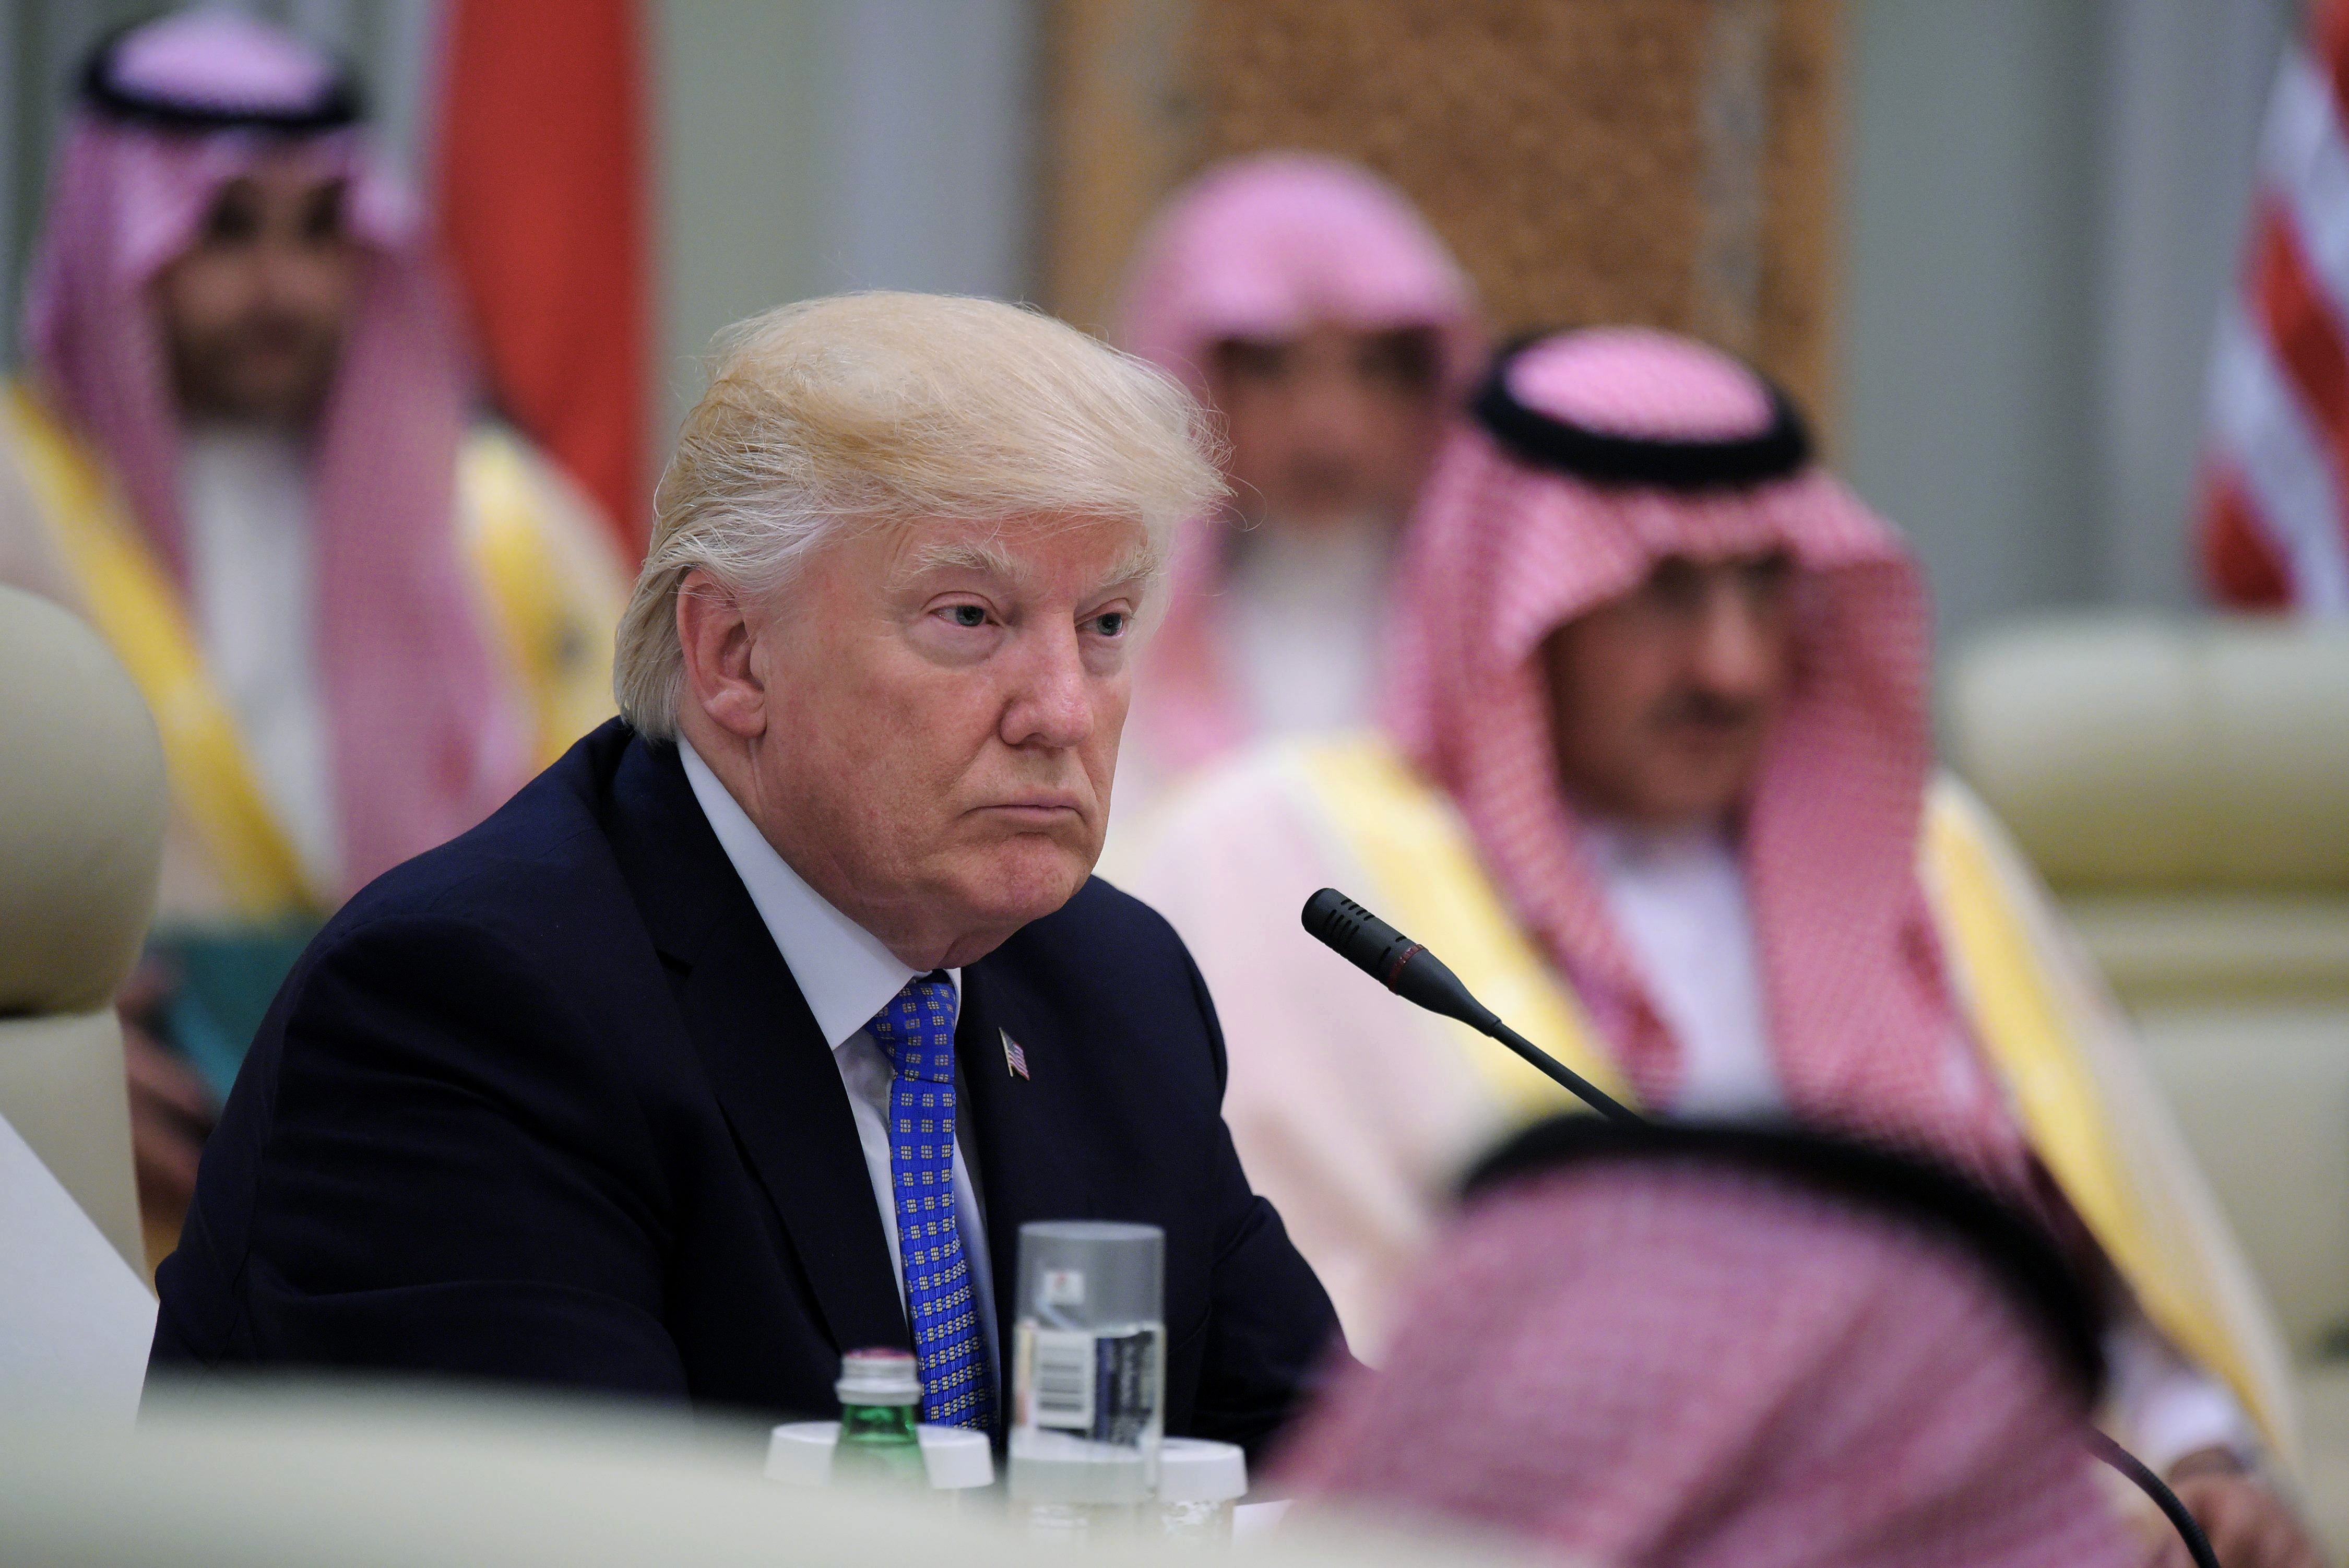 President Trump attends a conference in Riyadh